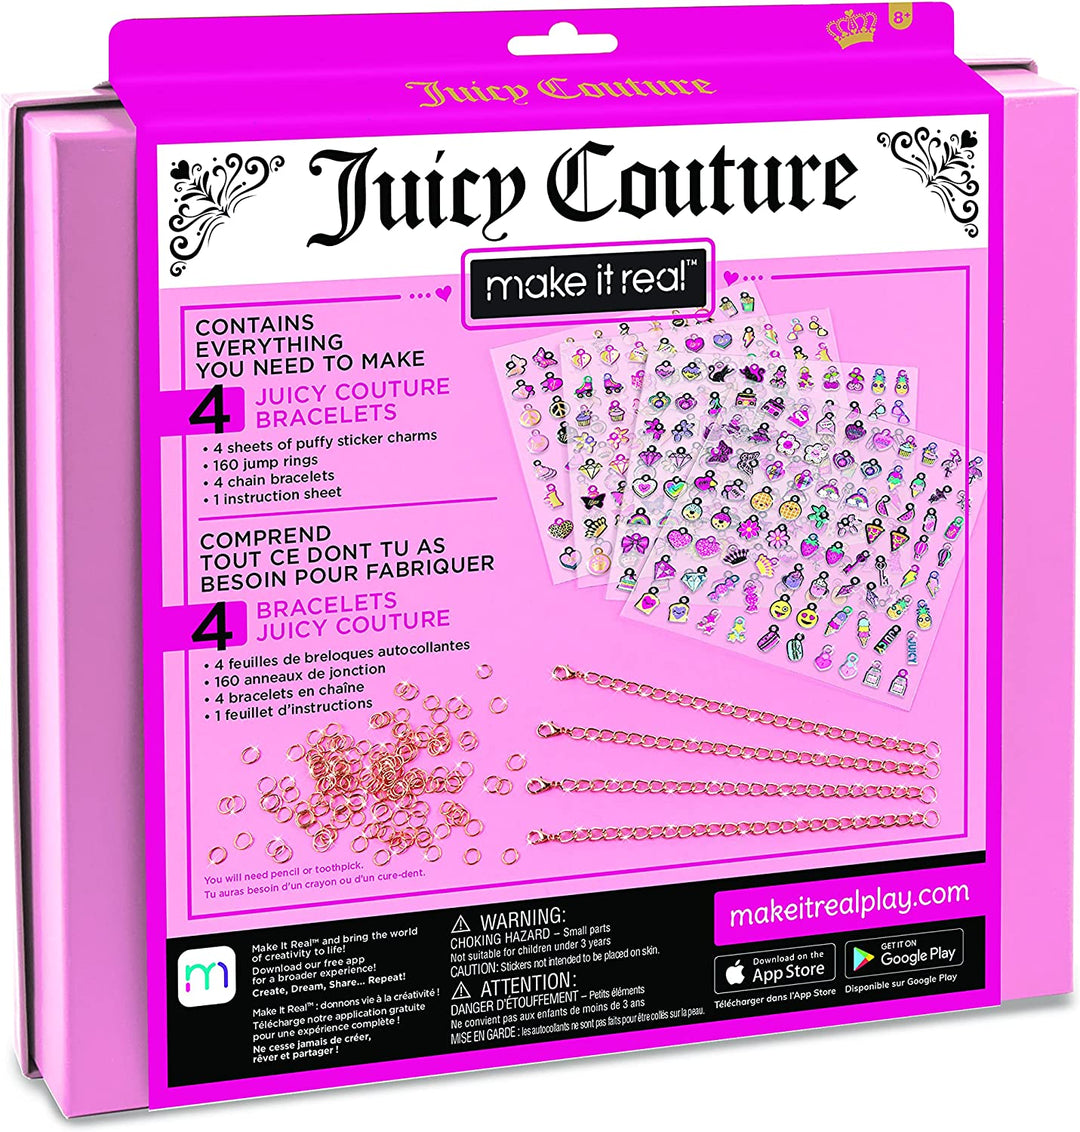 Make it real Juicy Couture Absolutely Charming